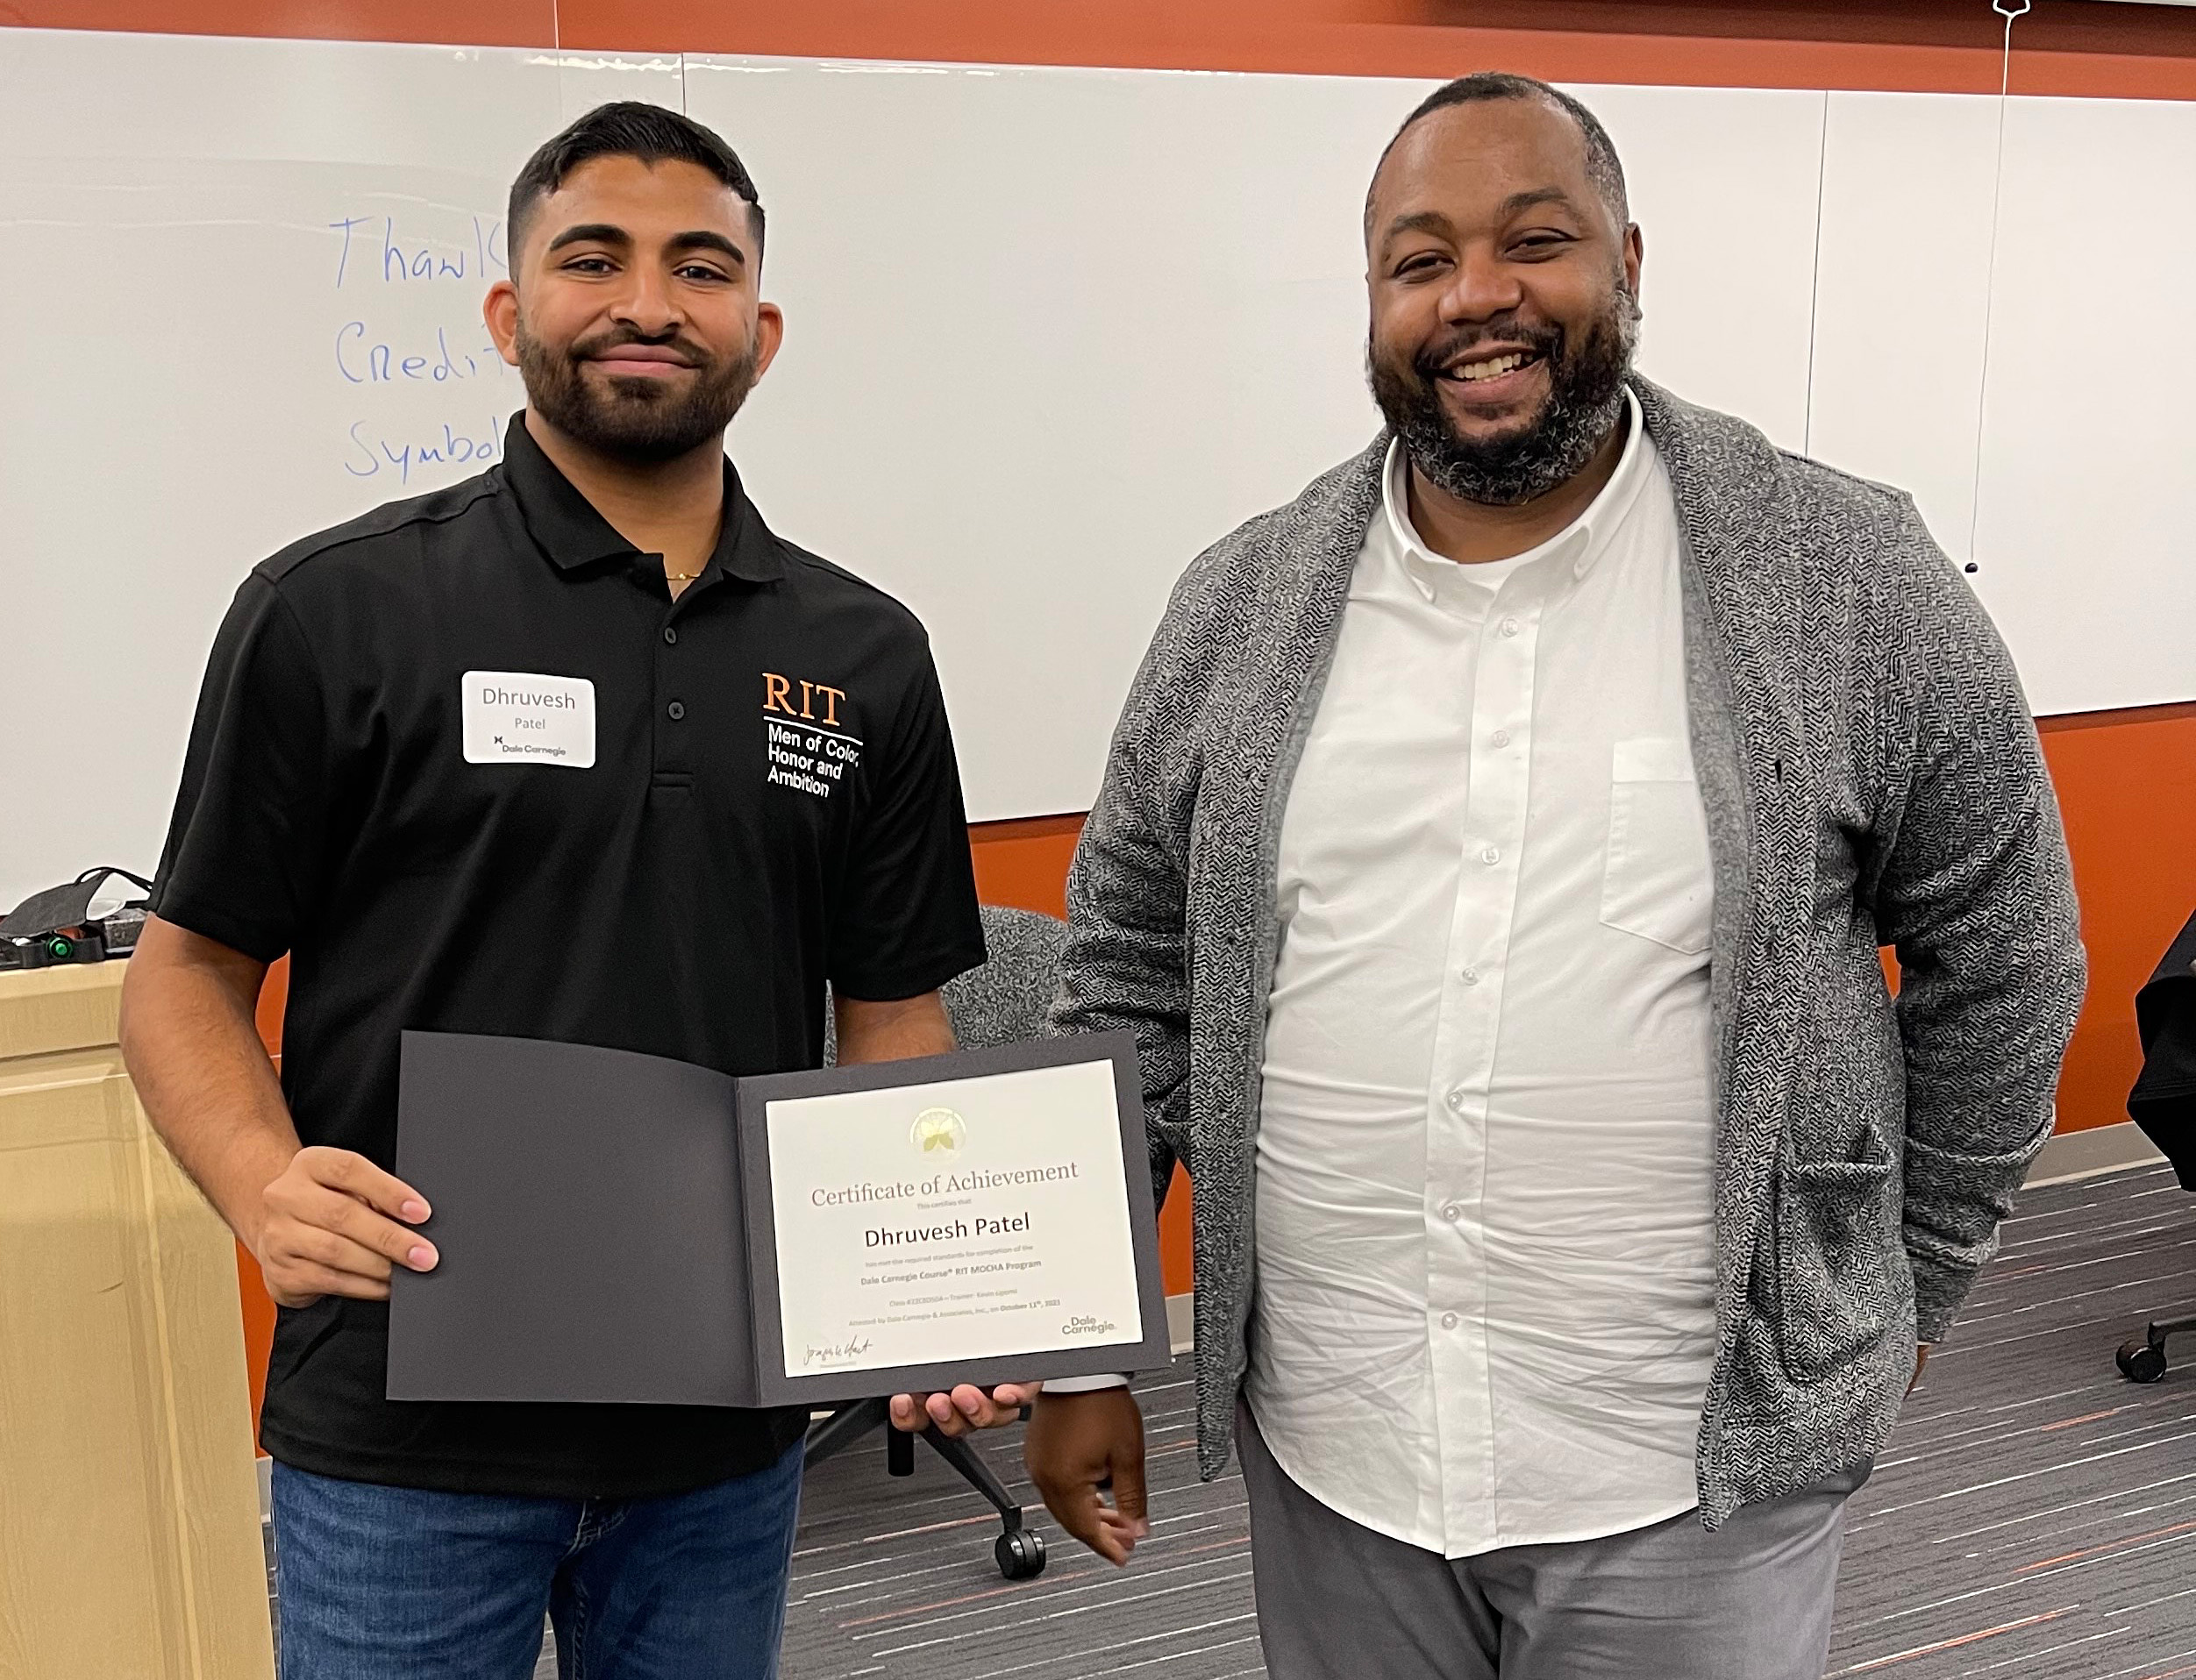 Photo of Dhruvesh holding a certificate of achievement from the Dale Carnegie course, standing next to a man